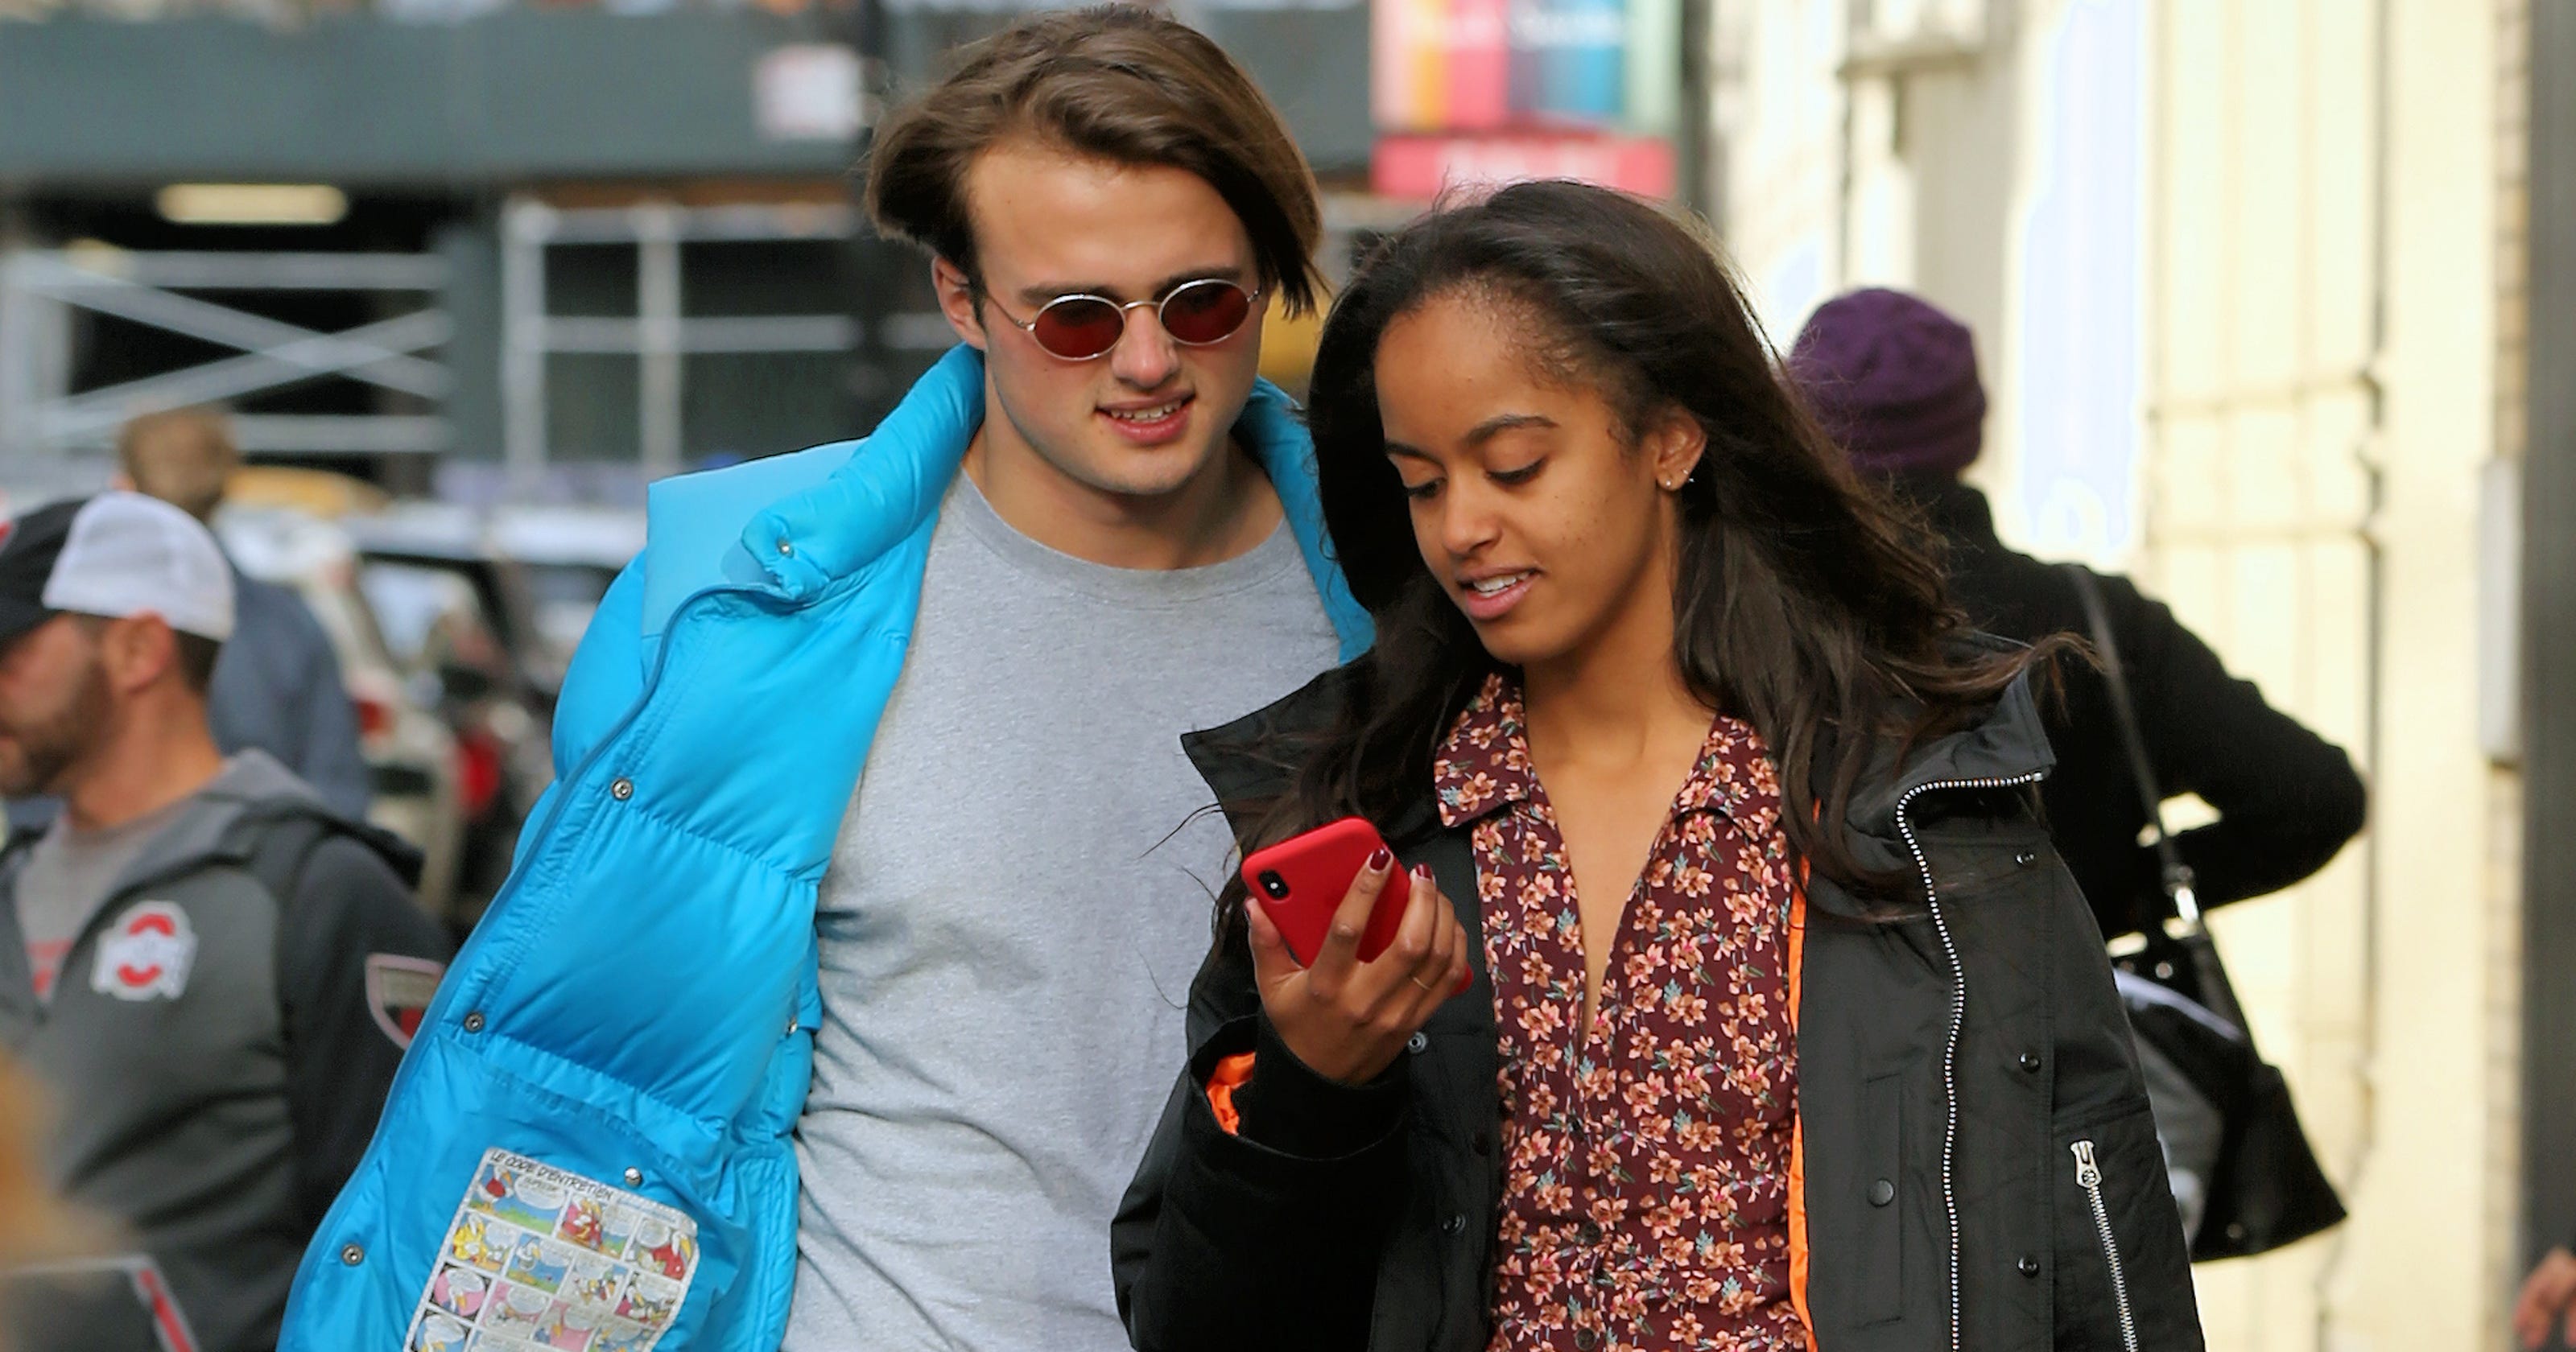 Malia Obama Steps Out With Rory Farquharson Her Alleged British Beau